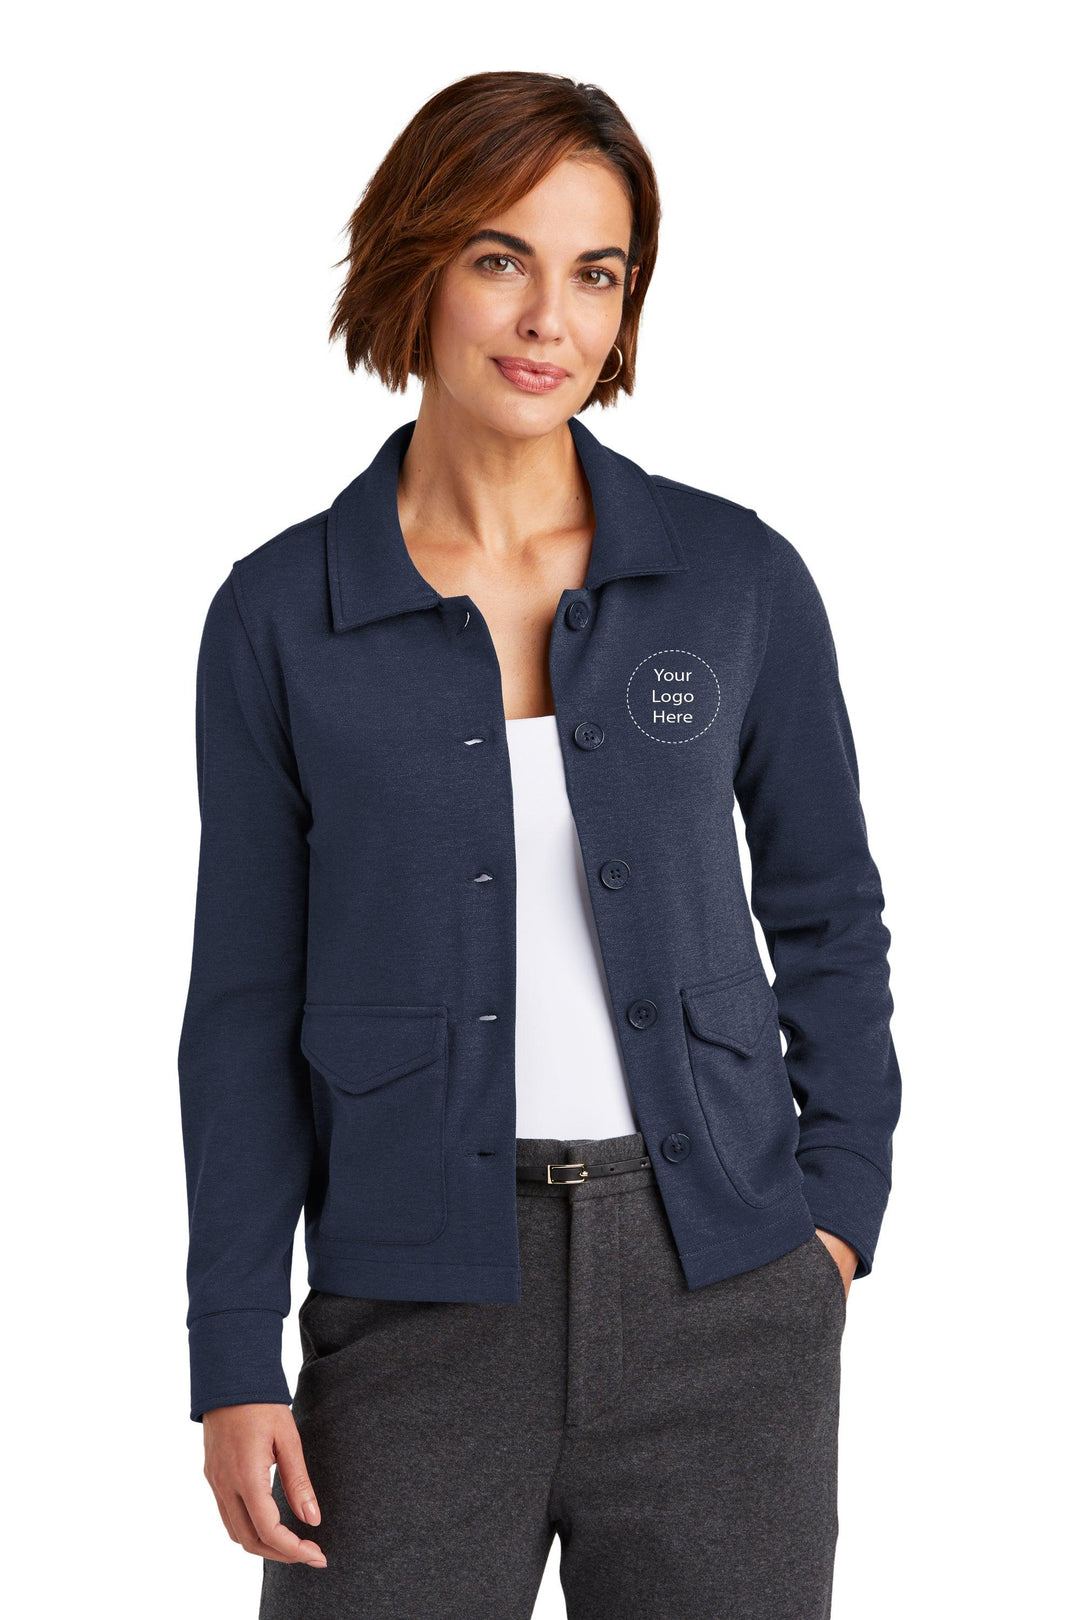 Keller Williams NEW KW-BB18205 Brooks Brothers® Women’s Mid-Layer Stretch Button Jacket 